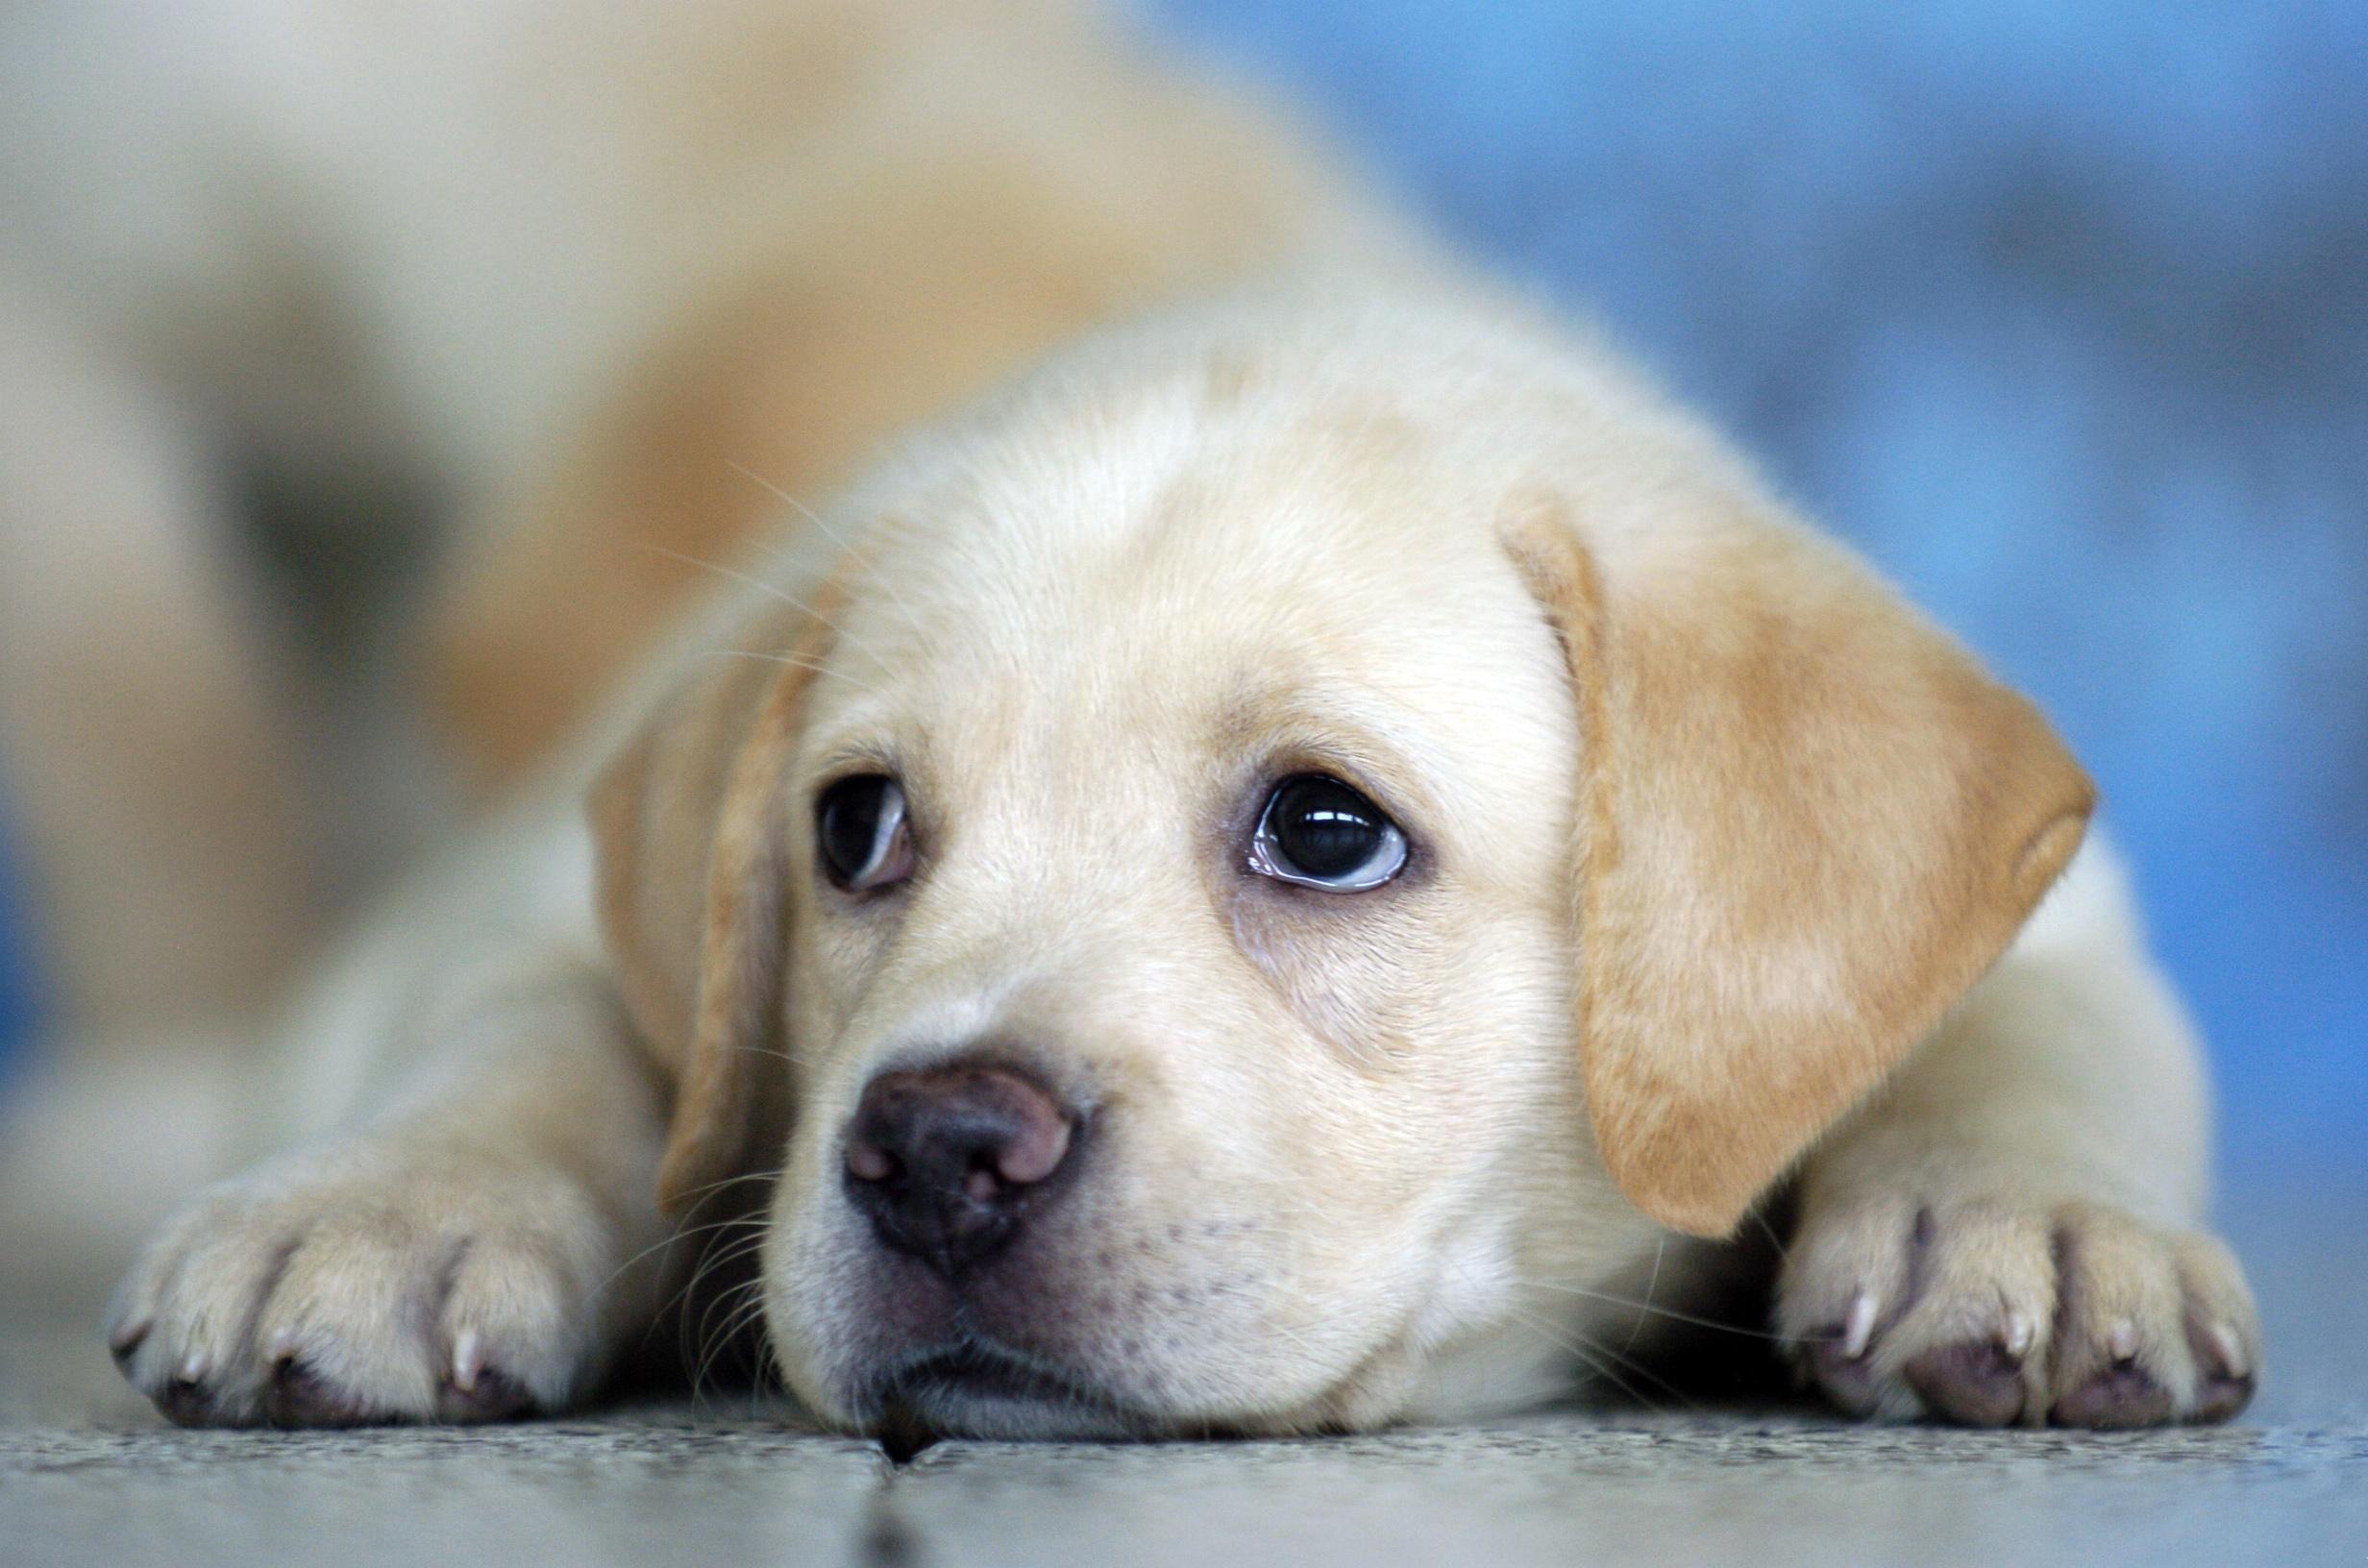 A yellow Labrador puppy lying down on the floor with its sad face